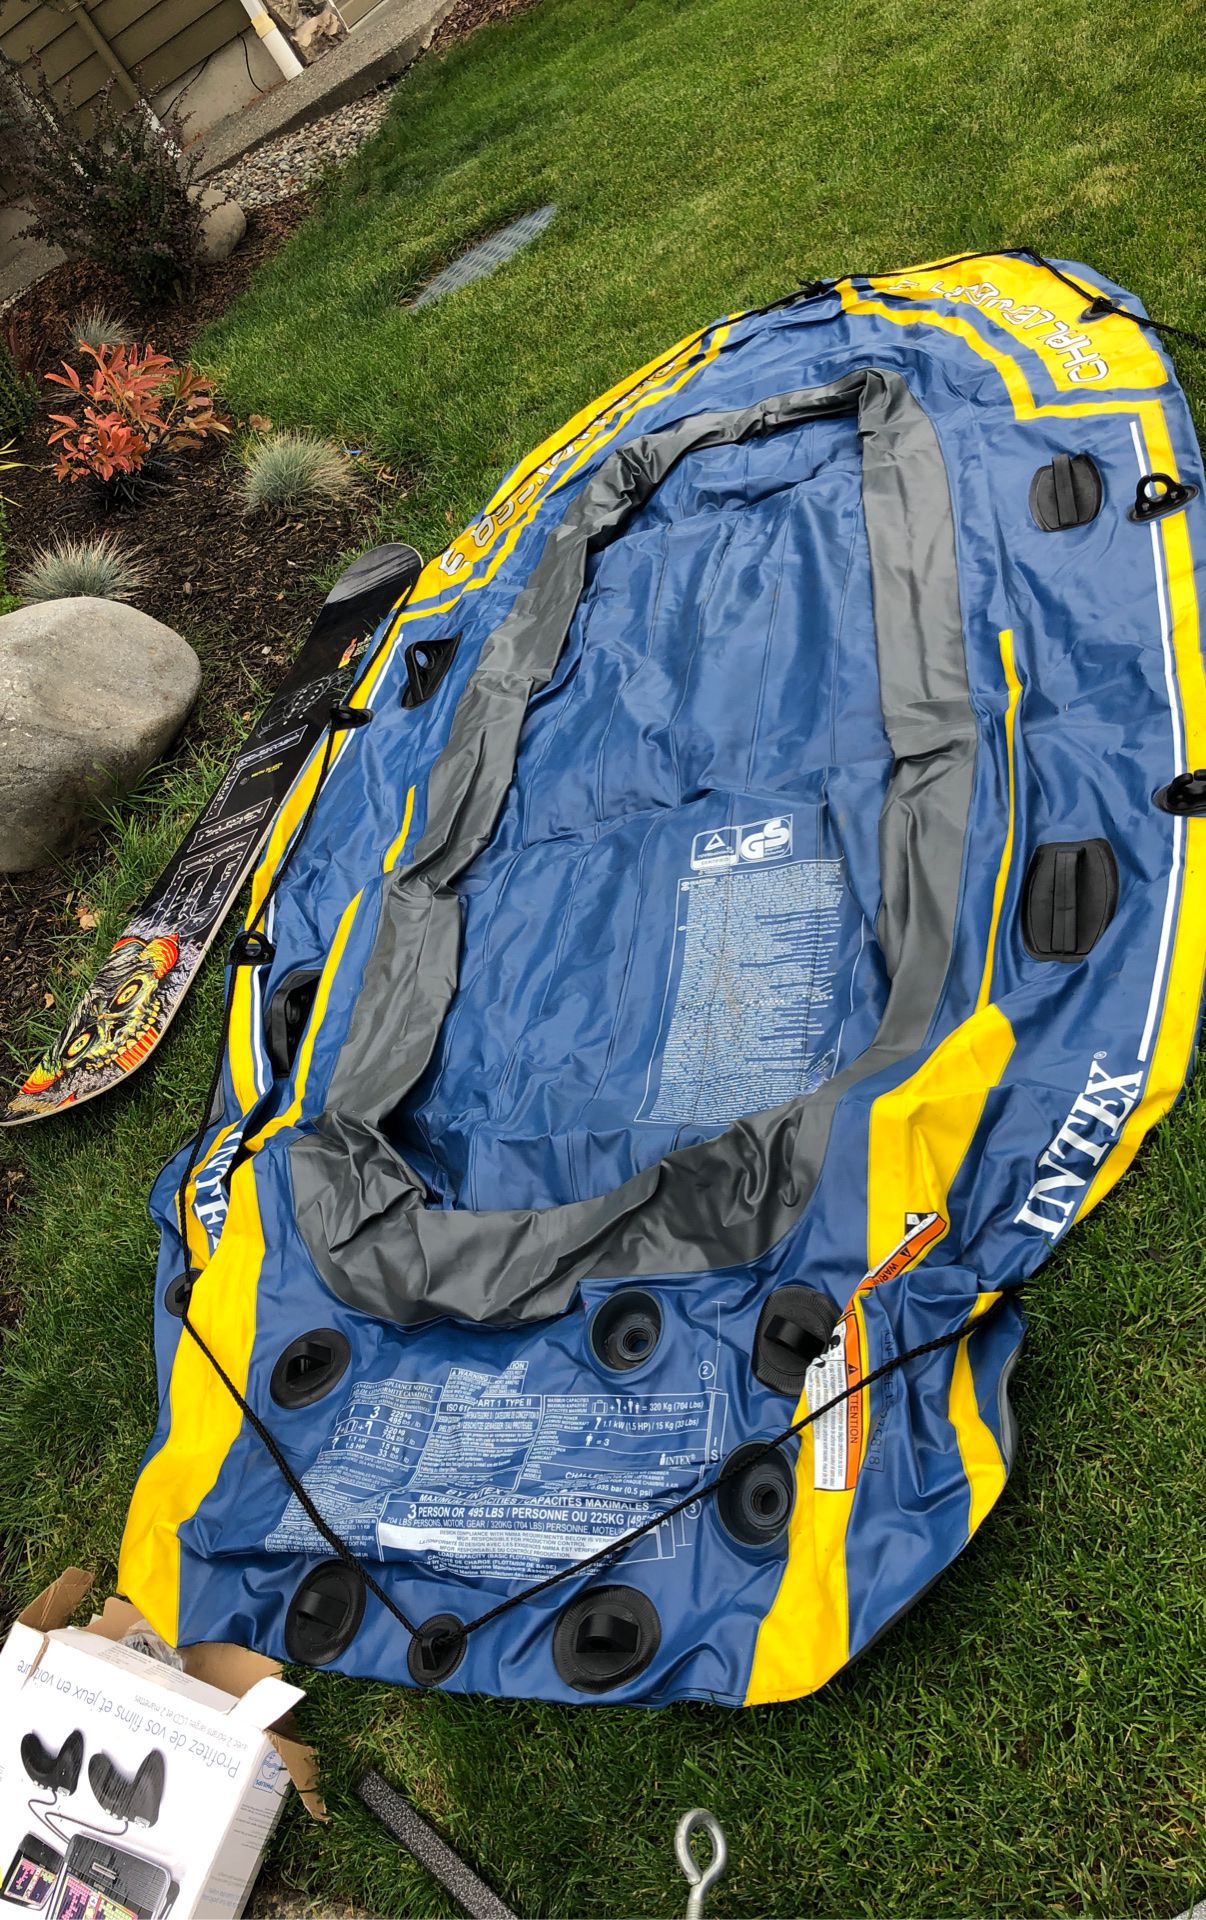 Intex 3 person Inflatable boat